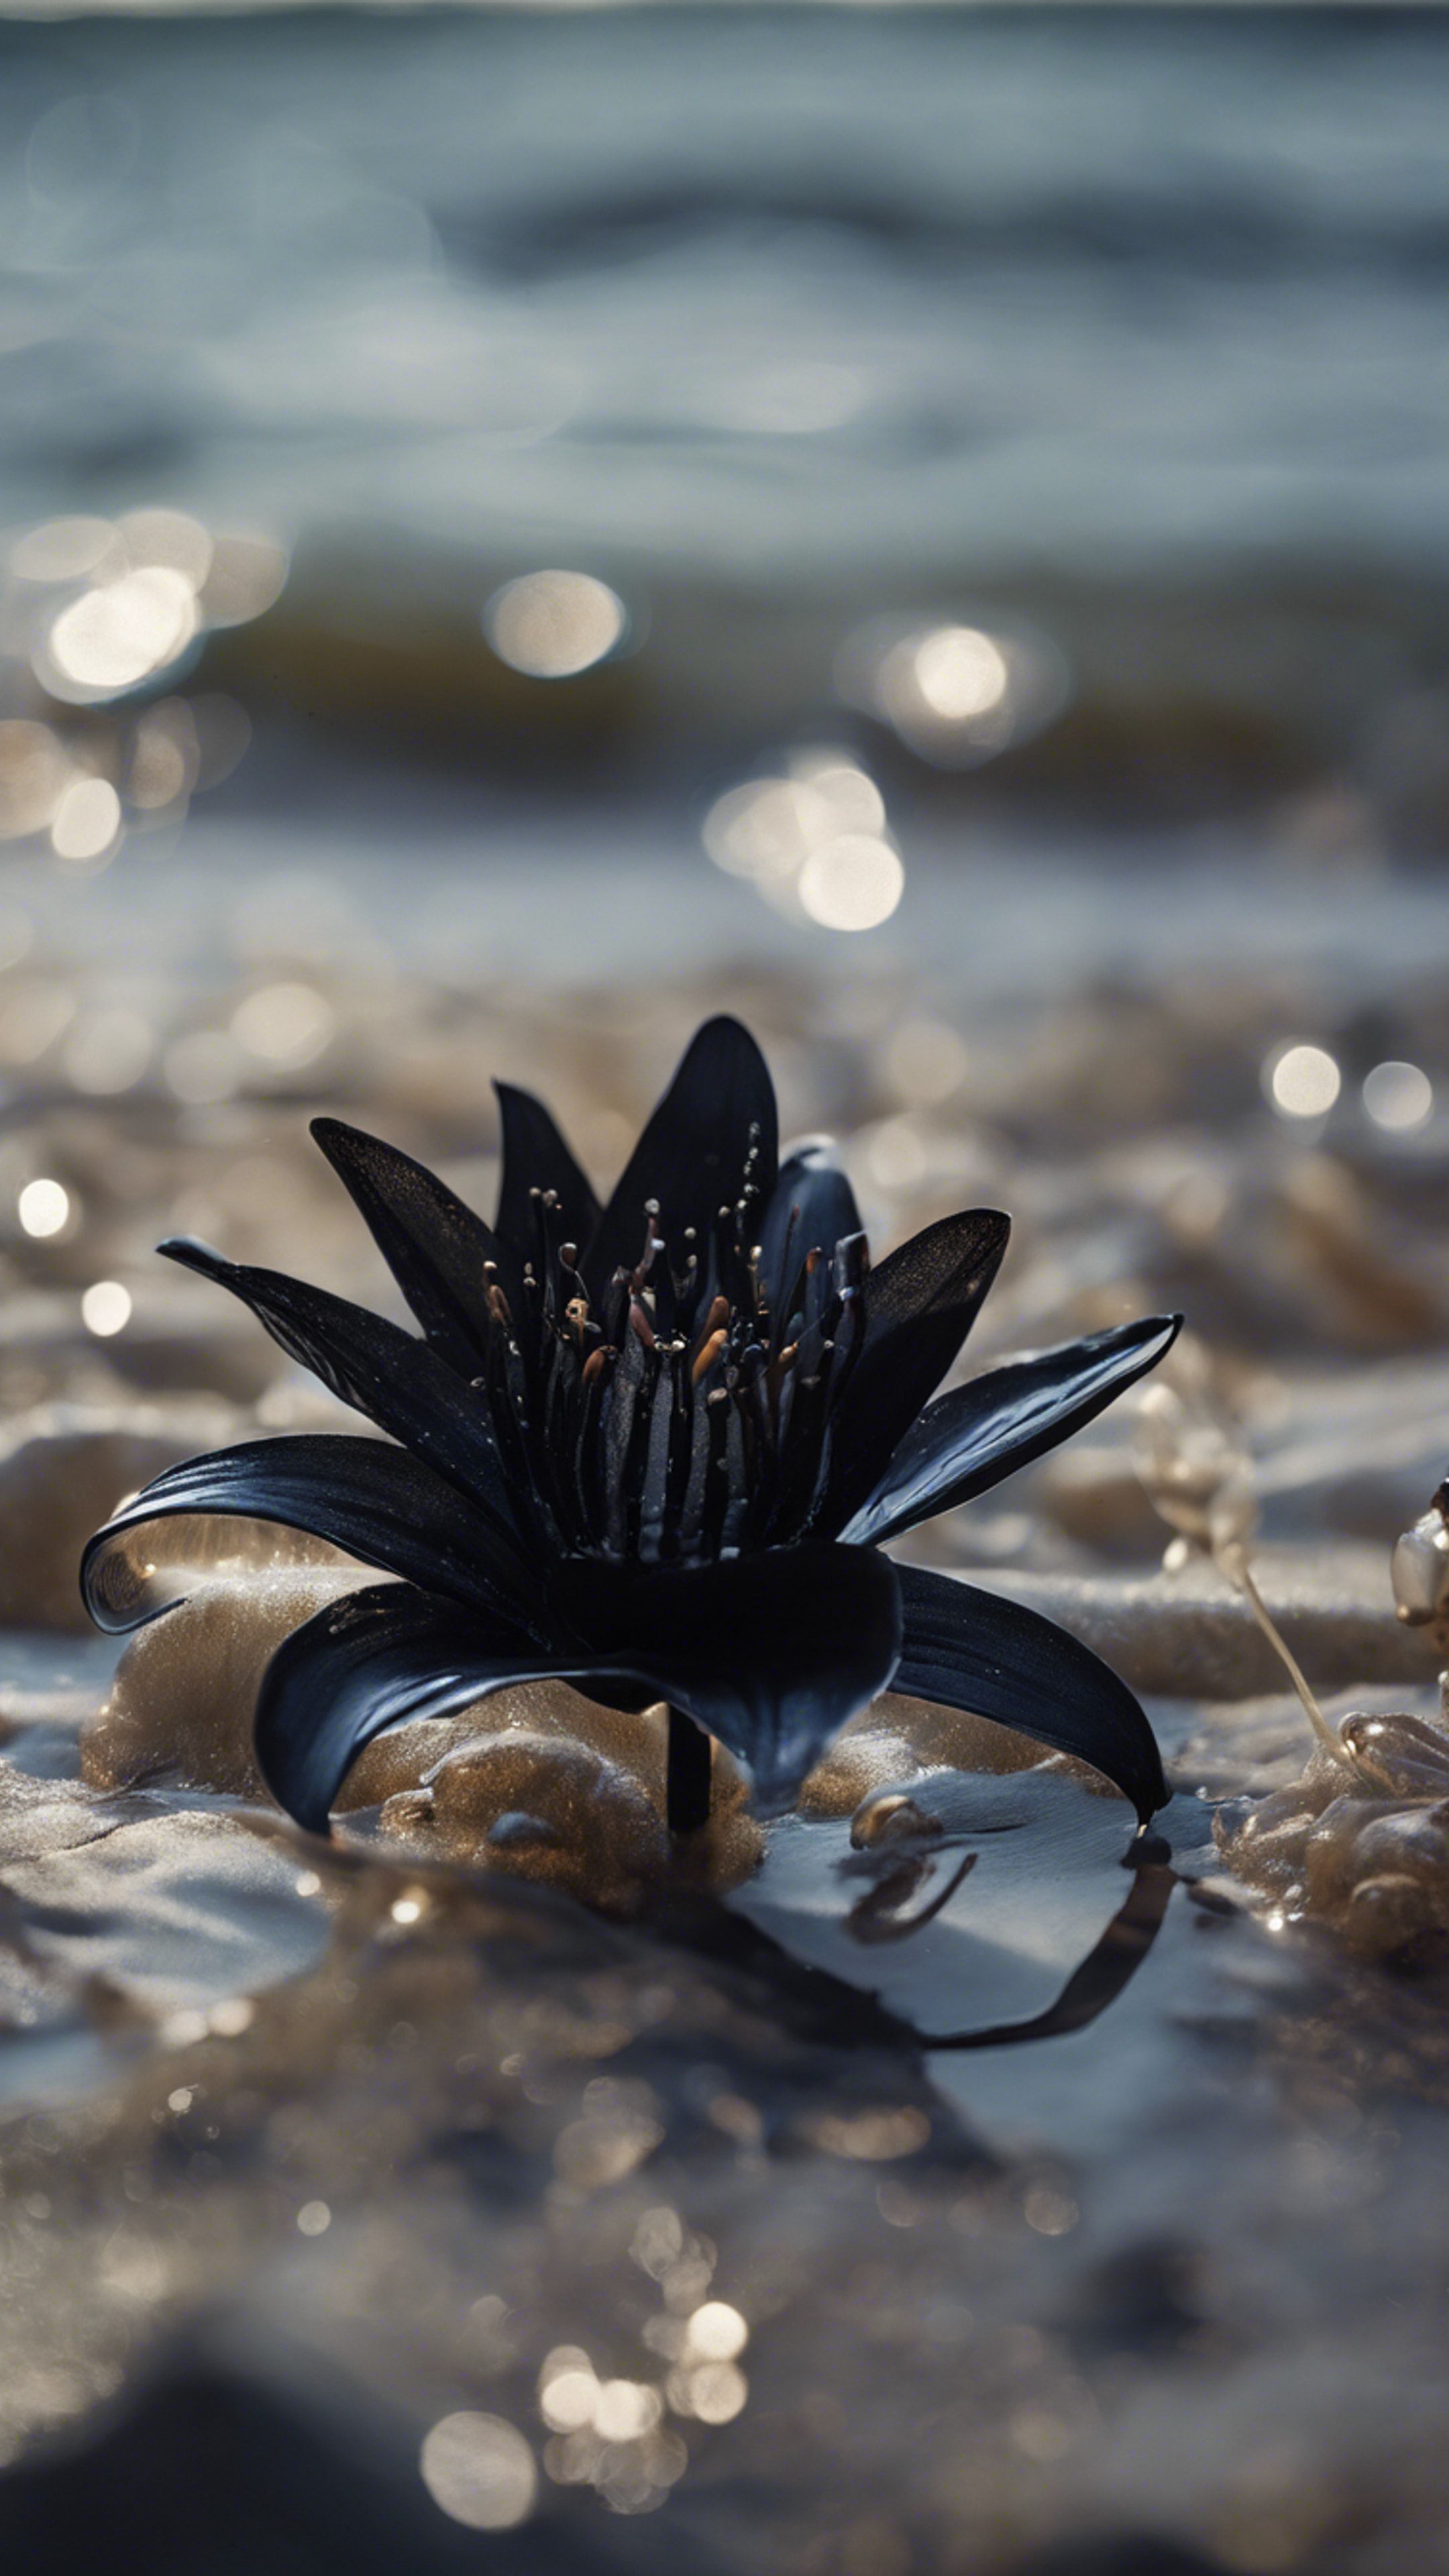 A black lily hiding under the tide, revealed only when the ocean pulls away, revealing the dark secrets of the sea bed. Fondo de pantalla[3833c30c18c941348380]